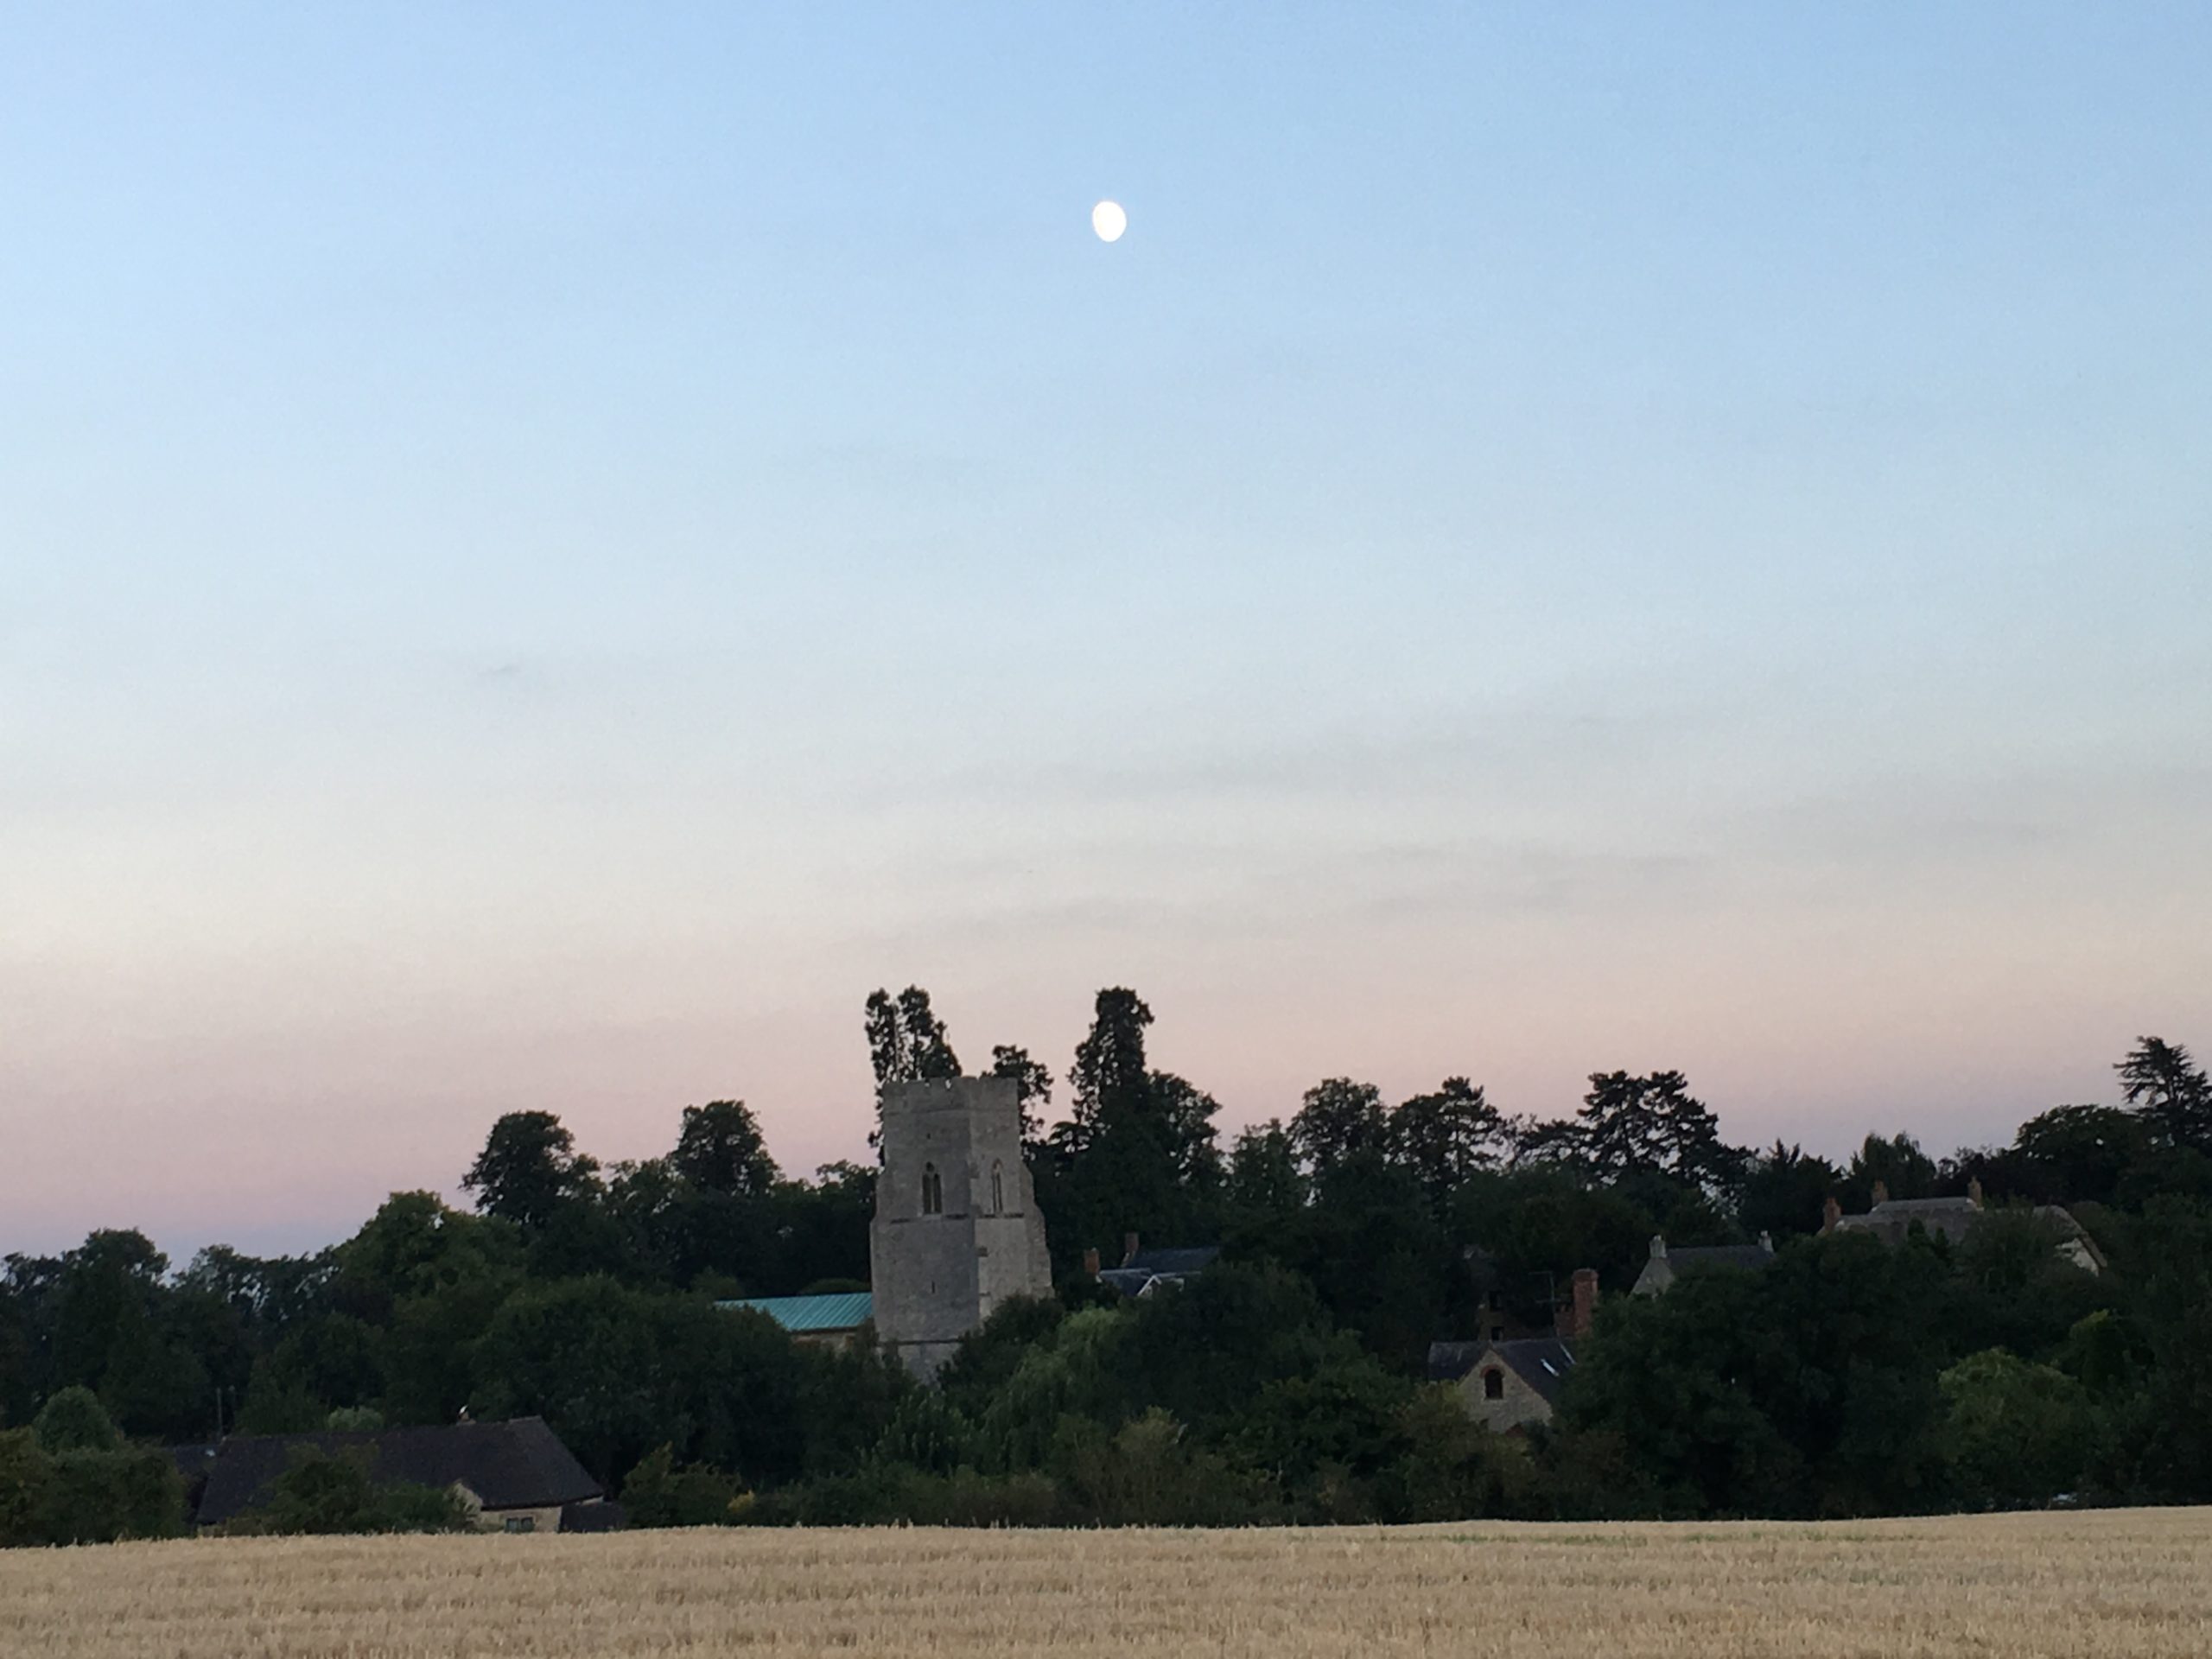 Dusk and the moon over a village